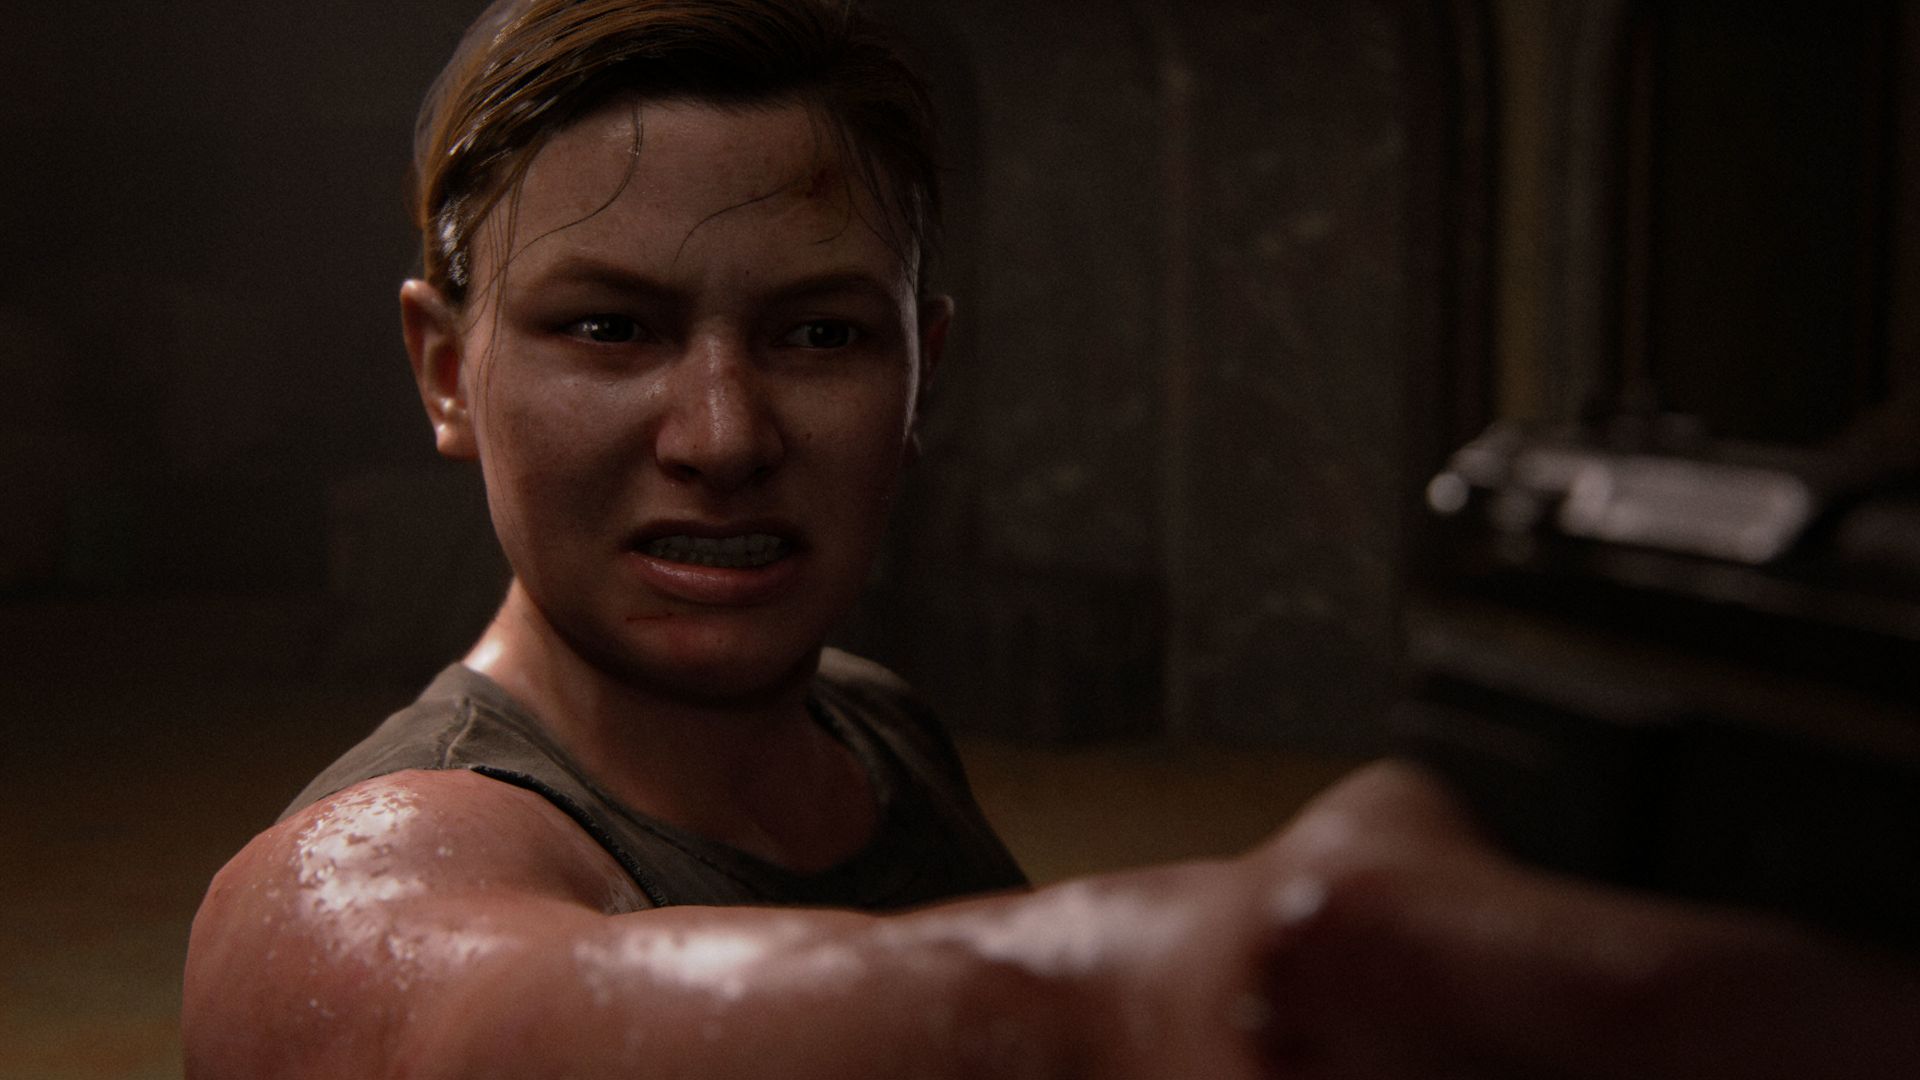 The Last of Us season 2 reportedly close to casting its Abby